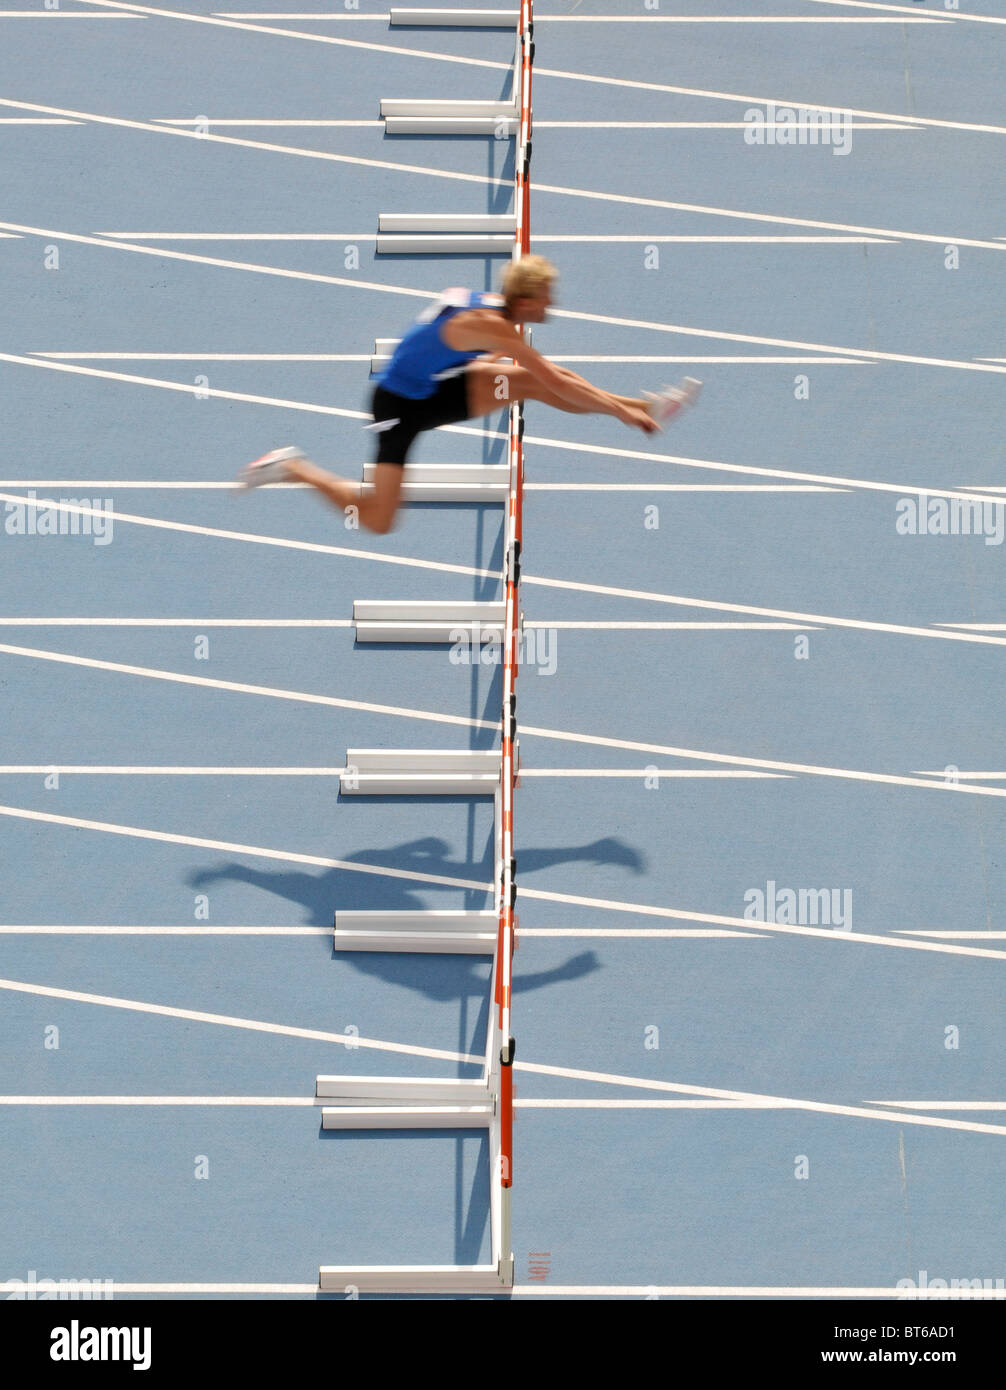 lone male sprinter jumps over hurdle during track and field event Stock Photo